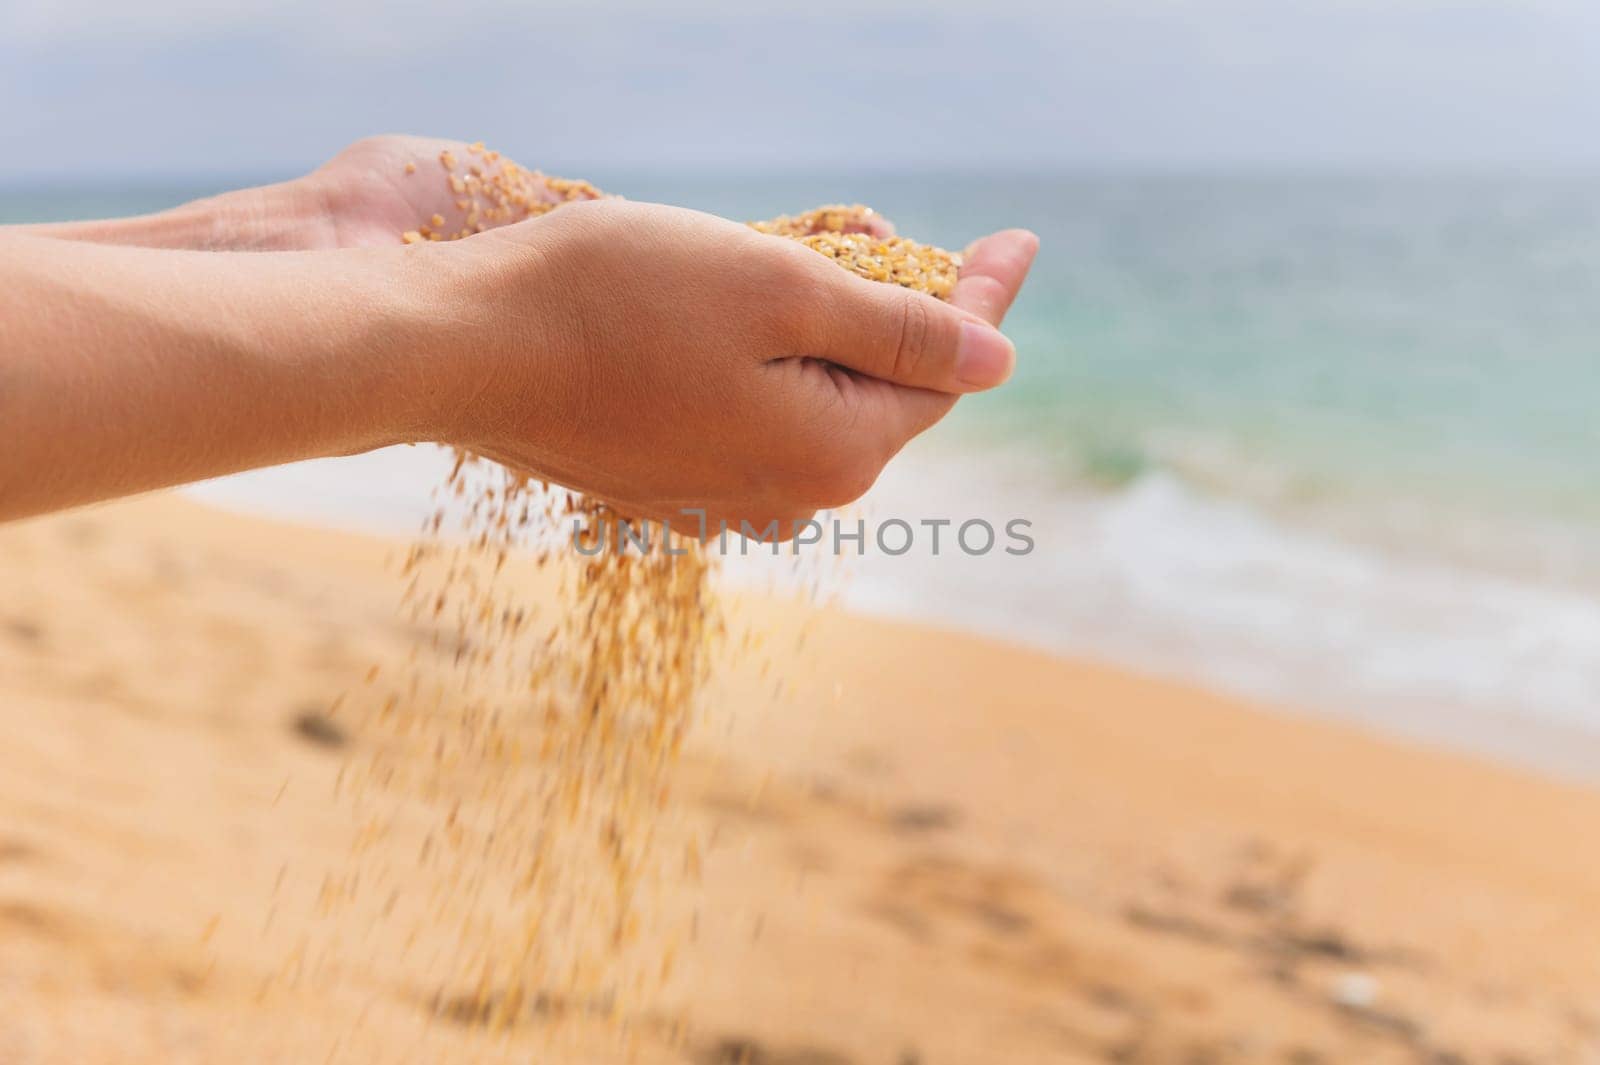 The hand releases the falling sand. Golden sand flows through your fingers on a sea background. Summer beach holiday and time passing concept.